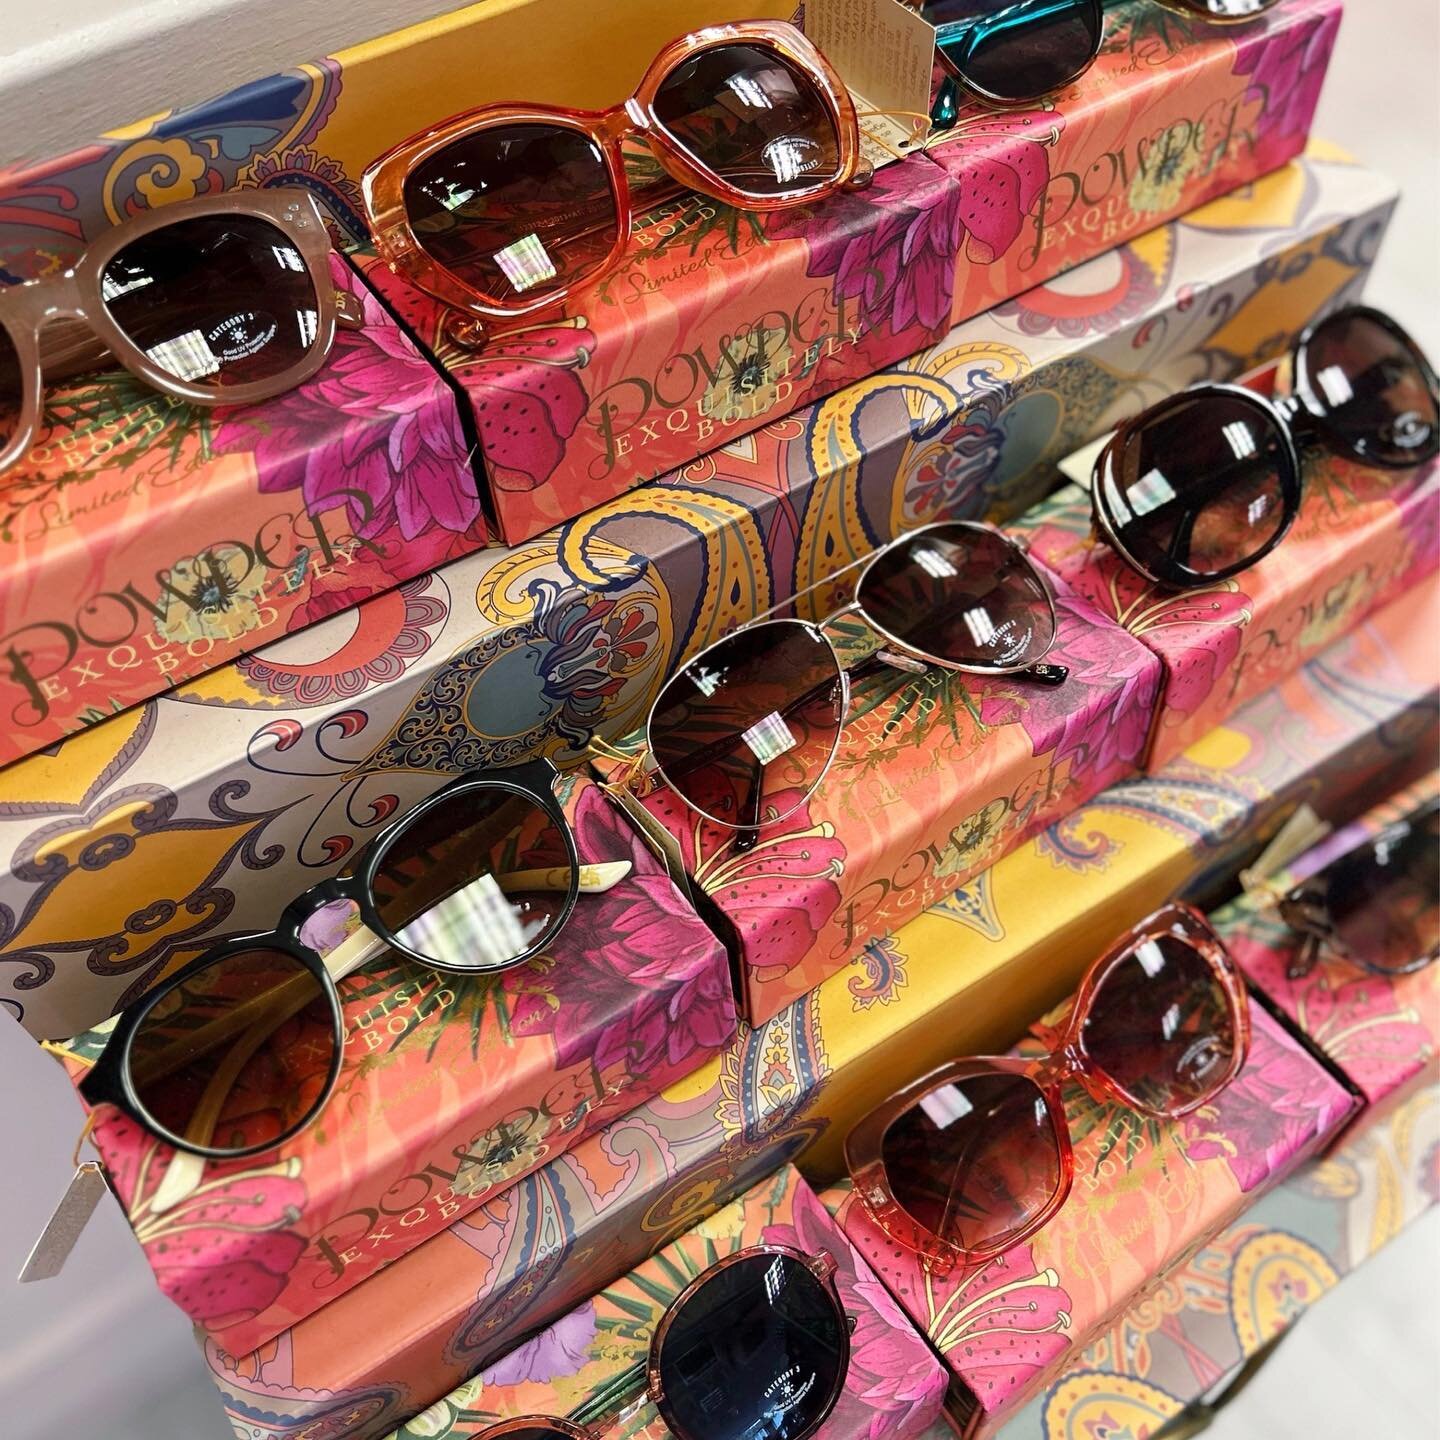 Finally it sounds like some nice weather is on its way and we&rsquo;re fully stocked up on our @powder_uk sunglasses ☀️
.
.
.
.
.
.
.
.
#Sunglasses #SummerFashion #SummerAccessories #SpringStyleInspo #SuenoBoutique #SuenoStyle #Amersham #AmershamLife